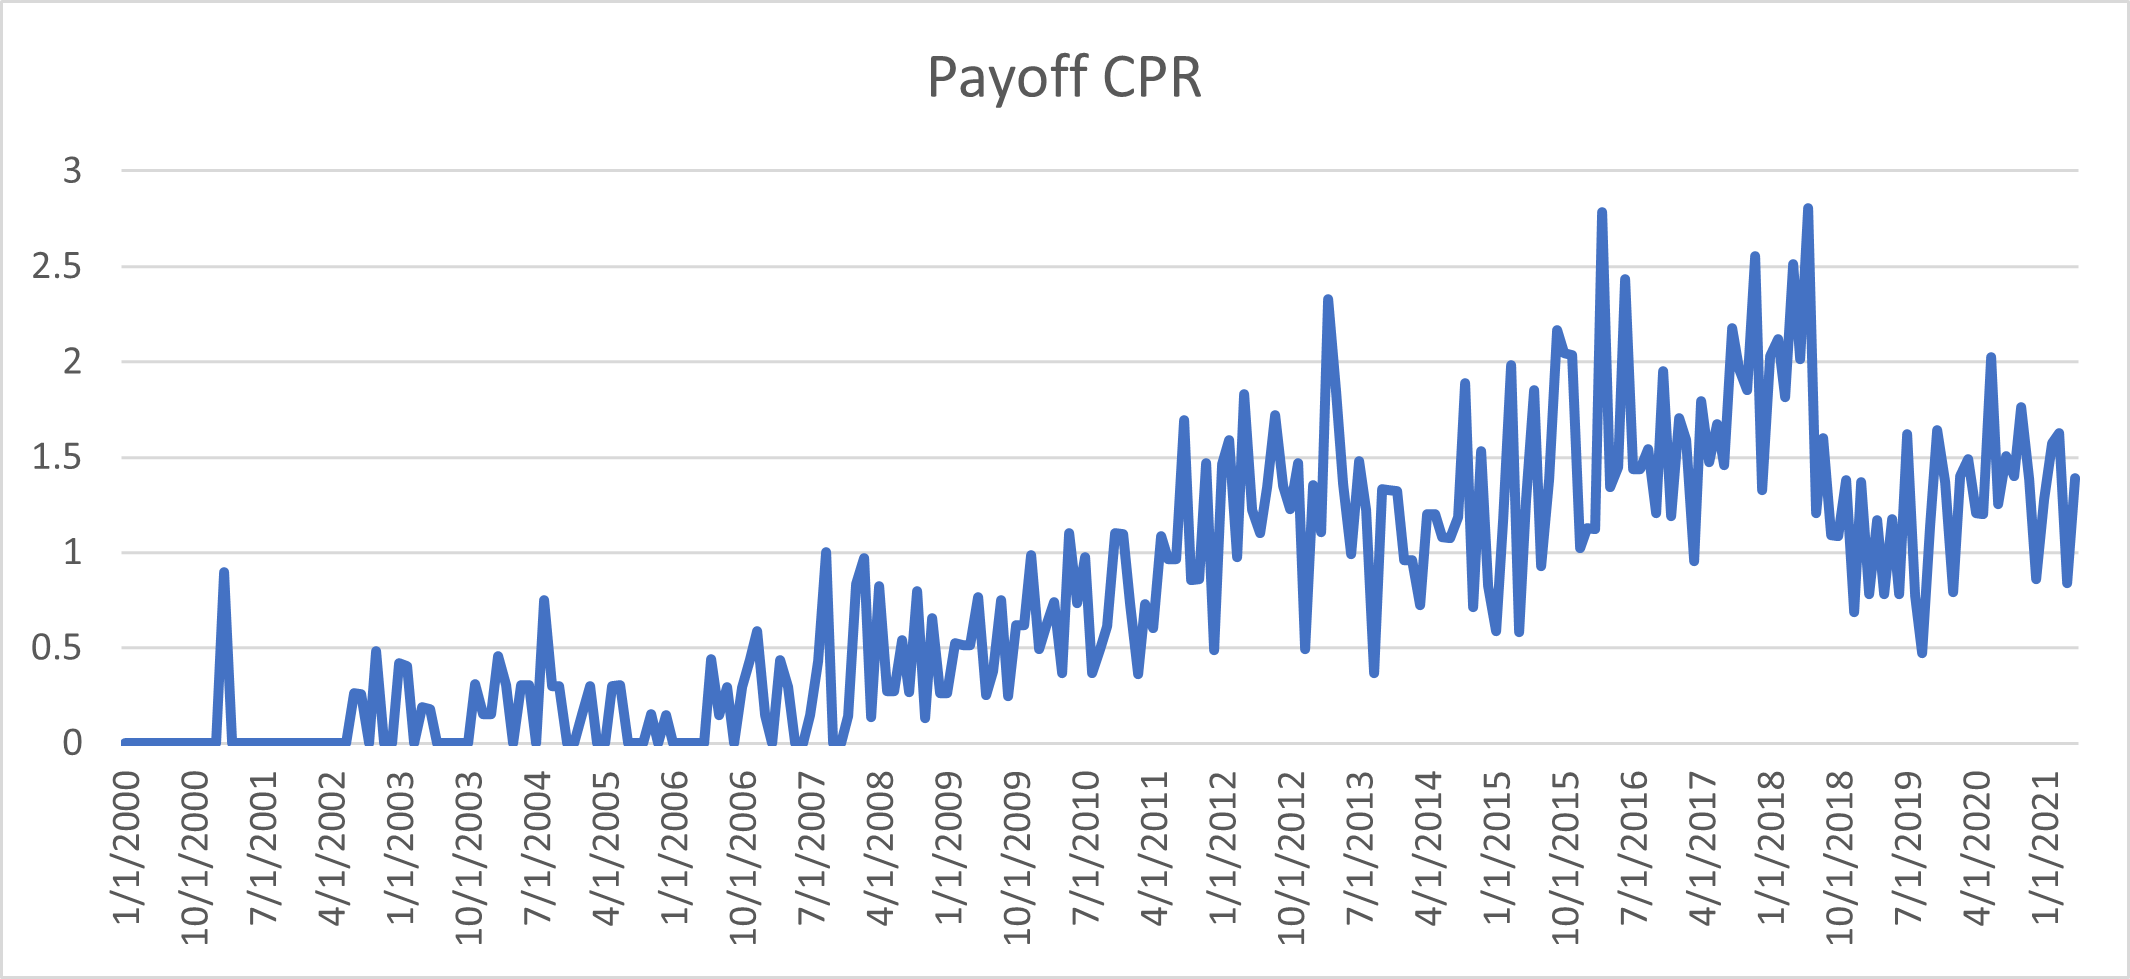 Payoff CPR